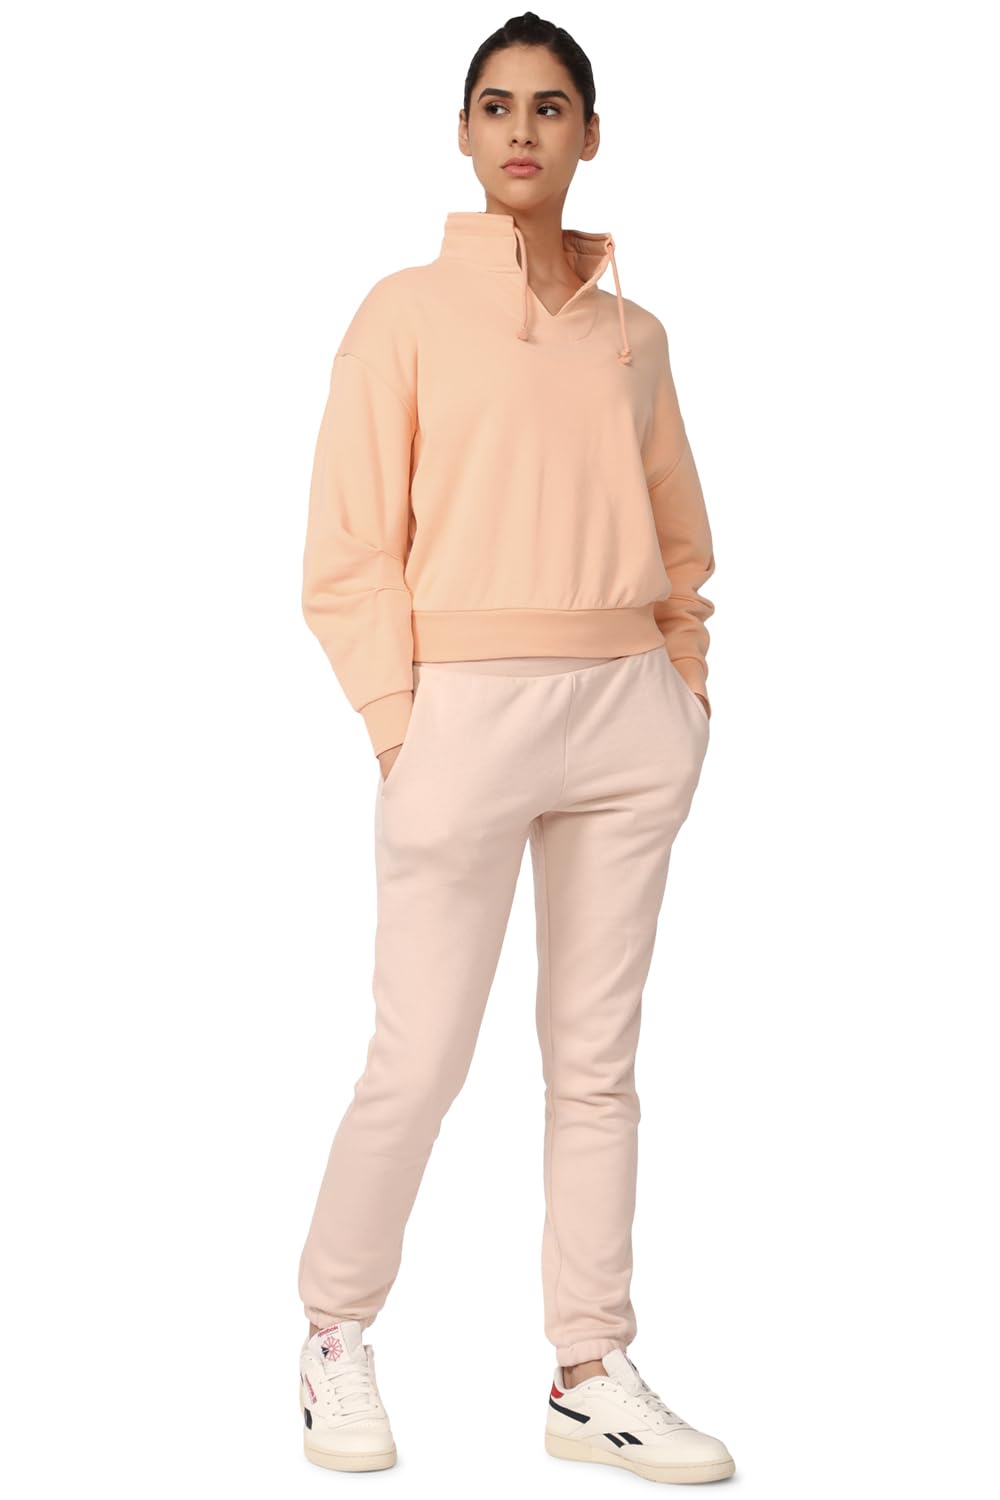 Reebok Womens CL WDE Cotton FT Coverup Peach